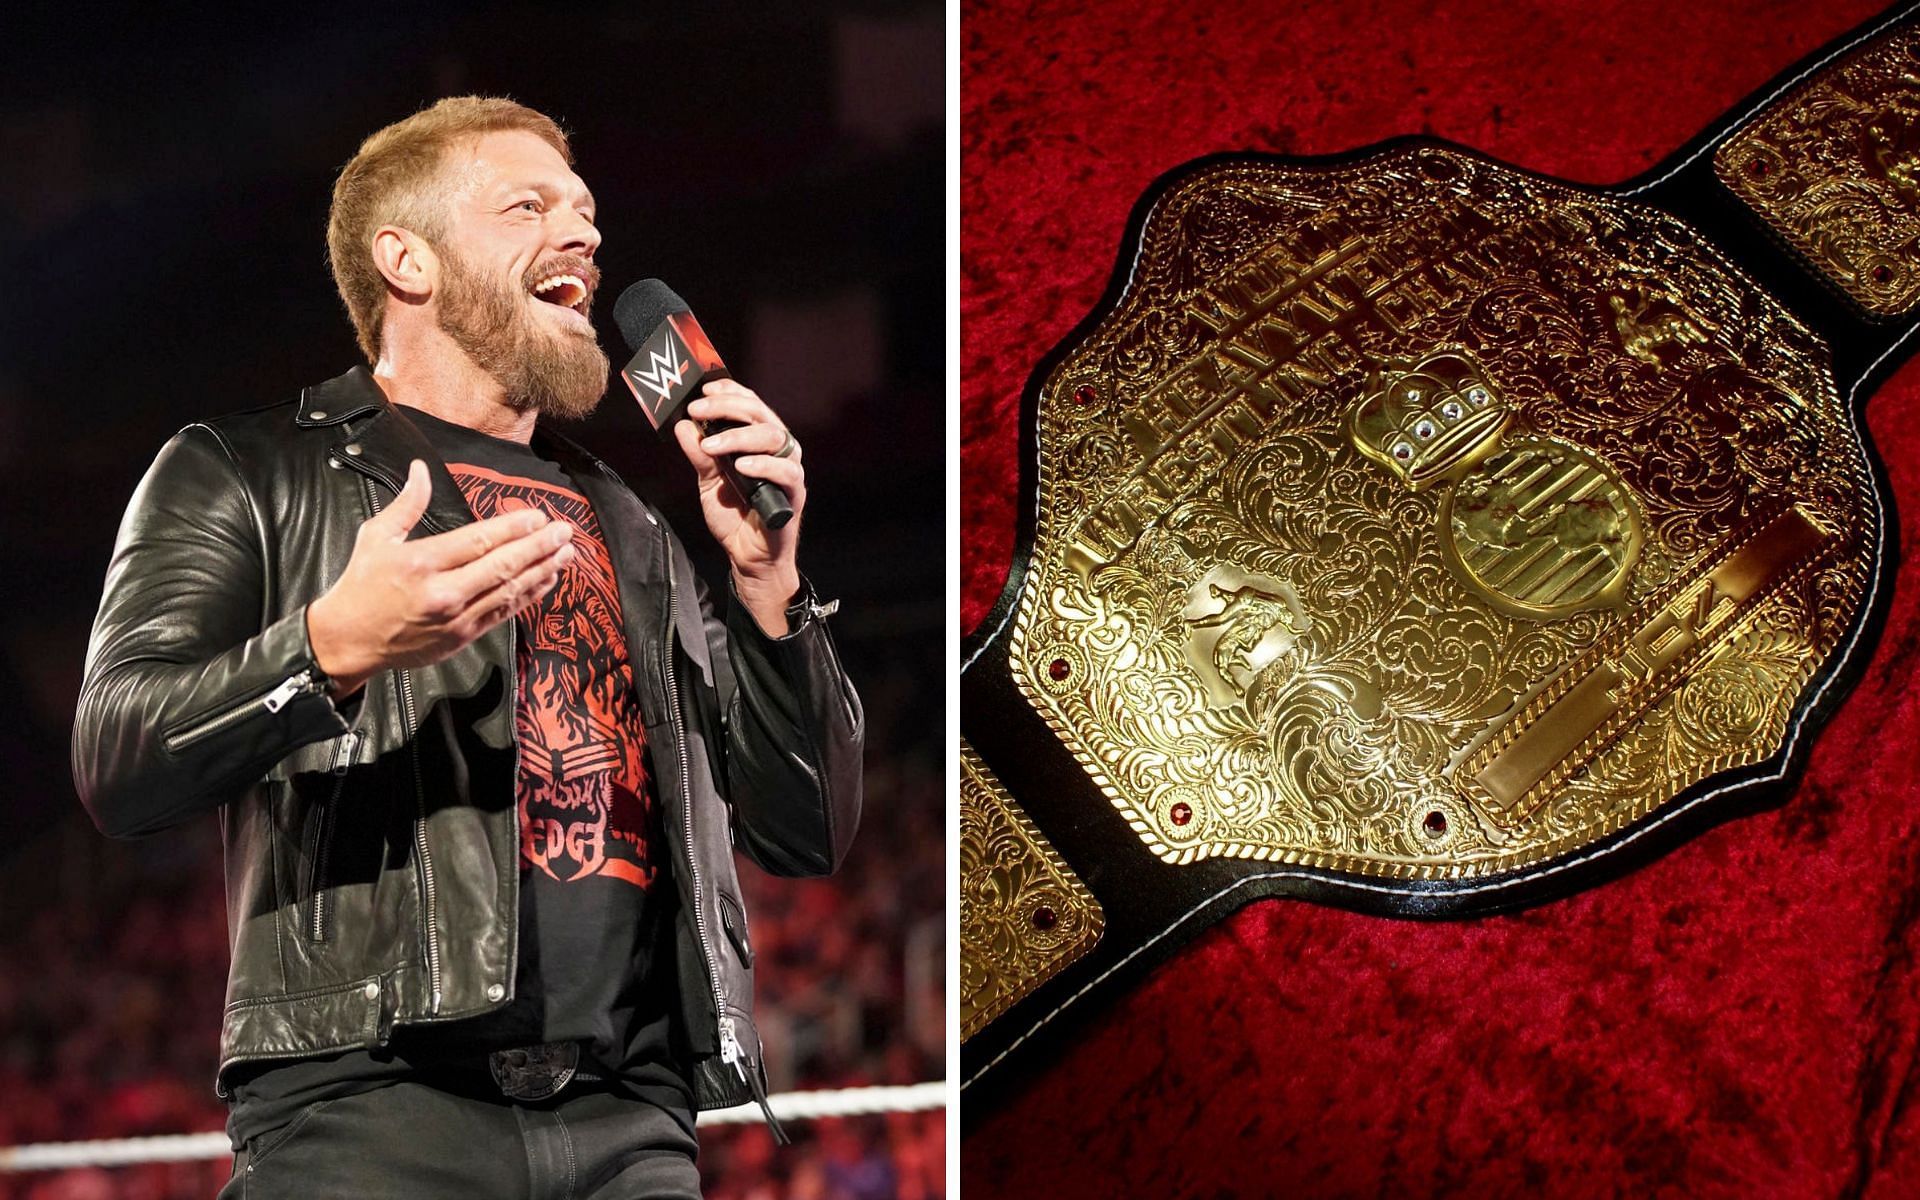 Edge is a 2-time Royal Rumble winner!